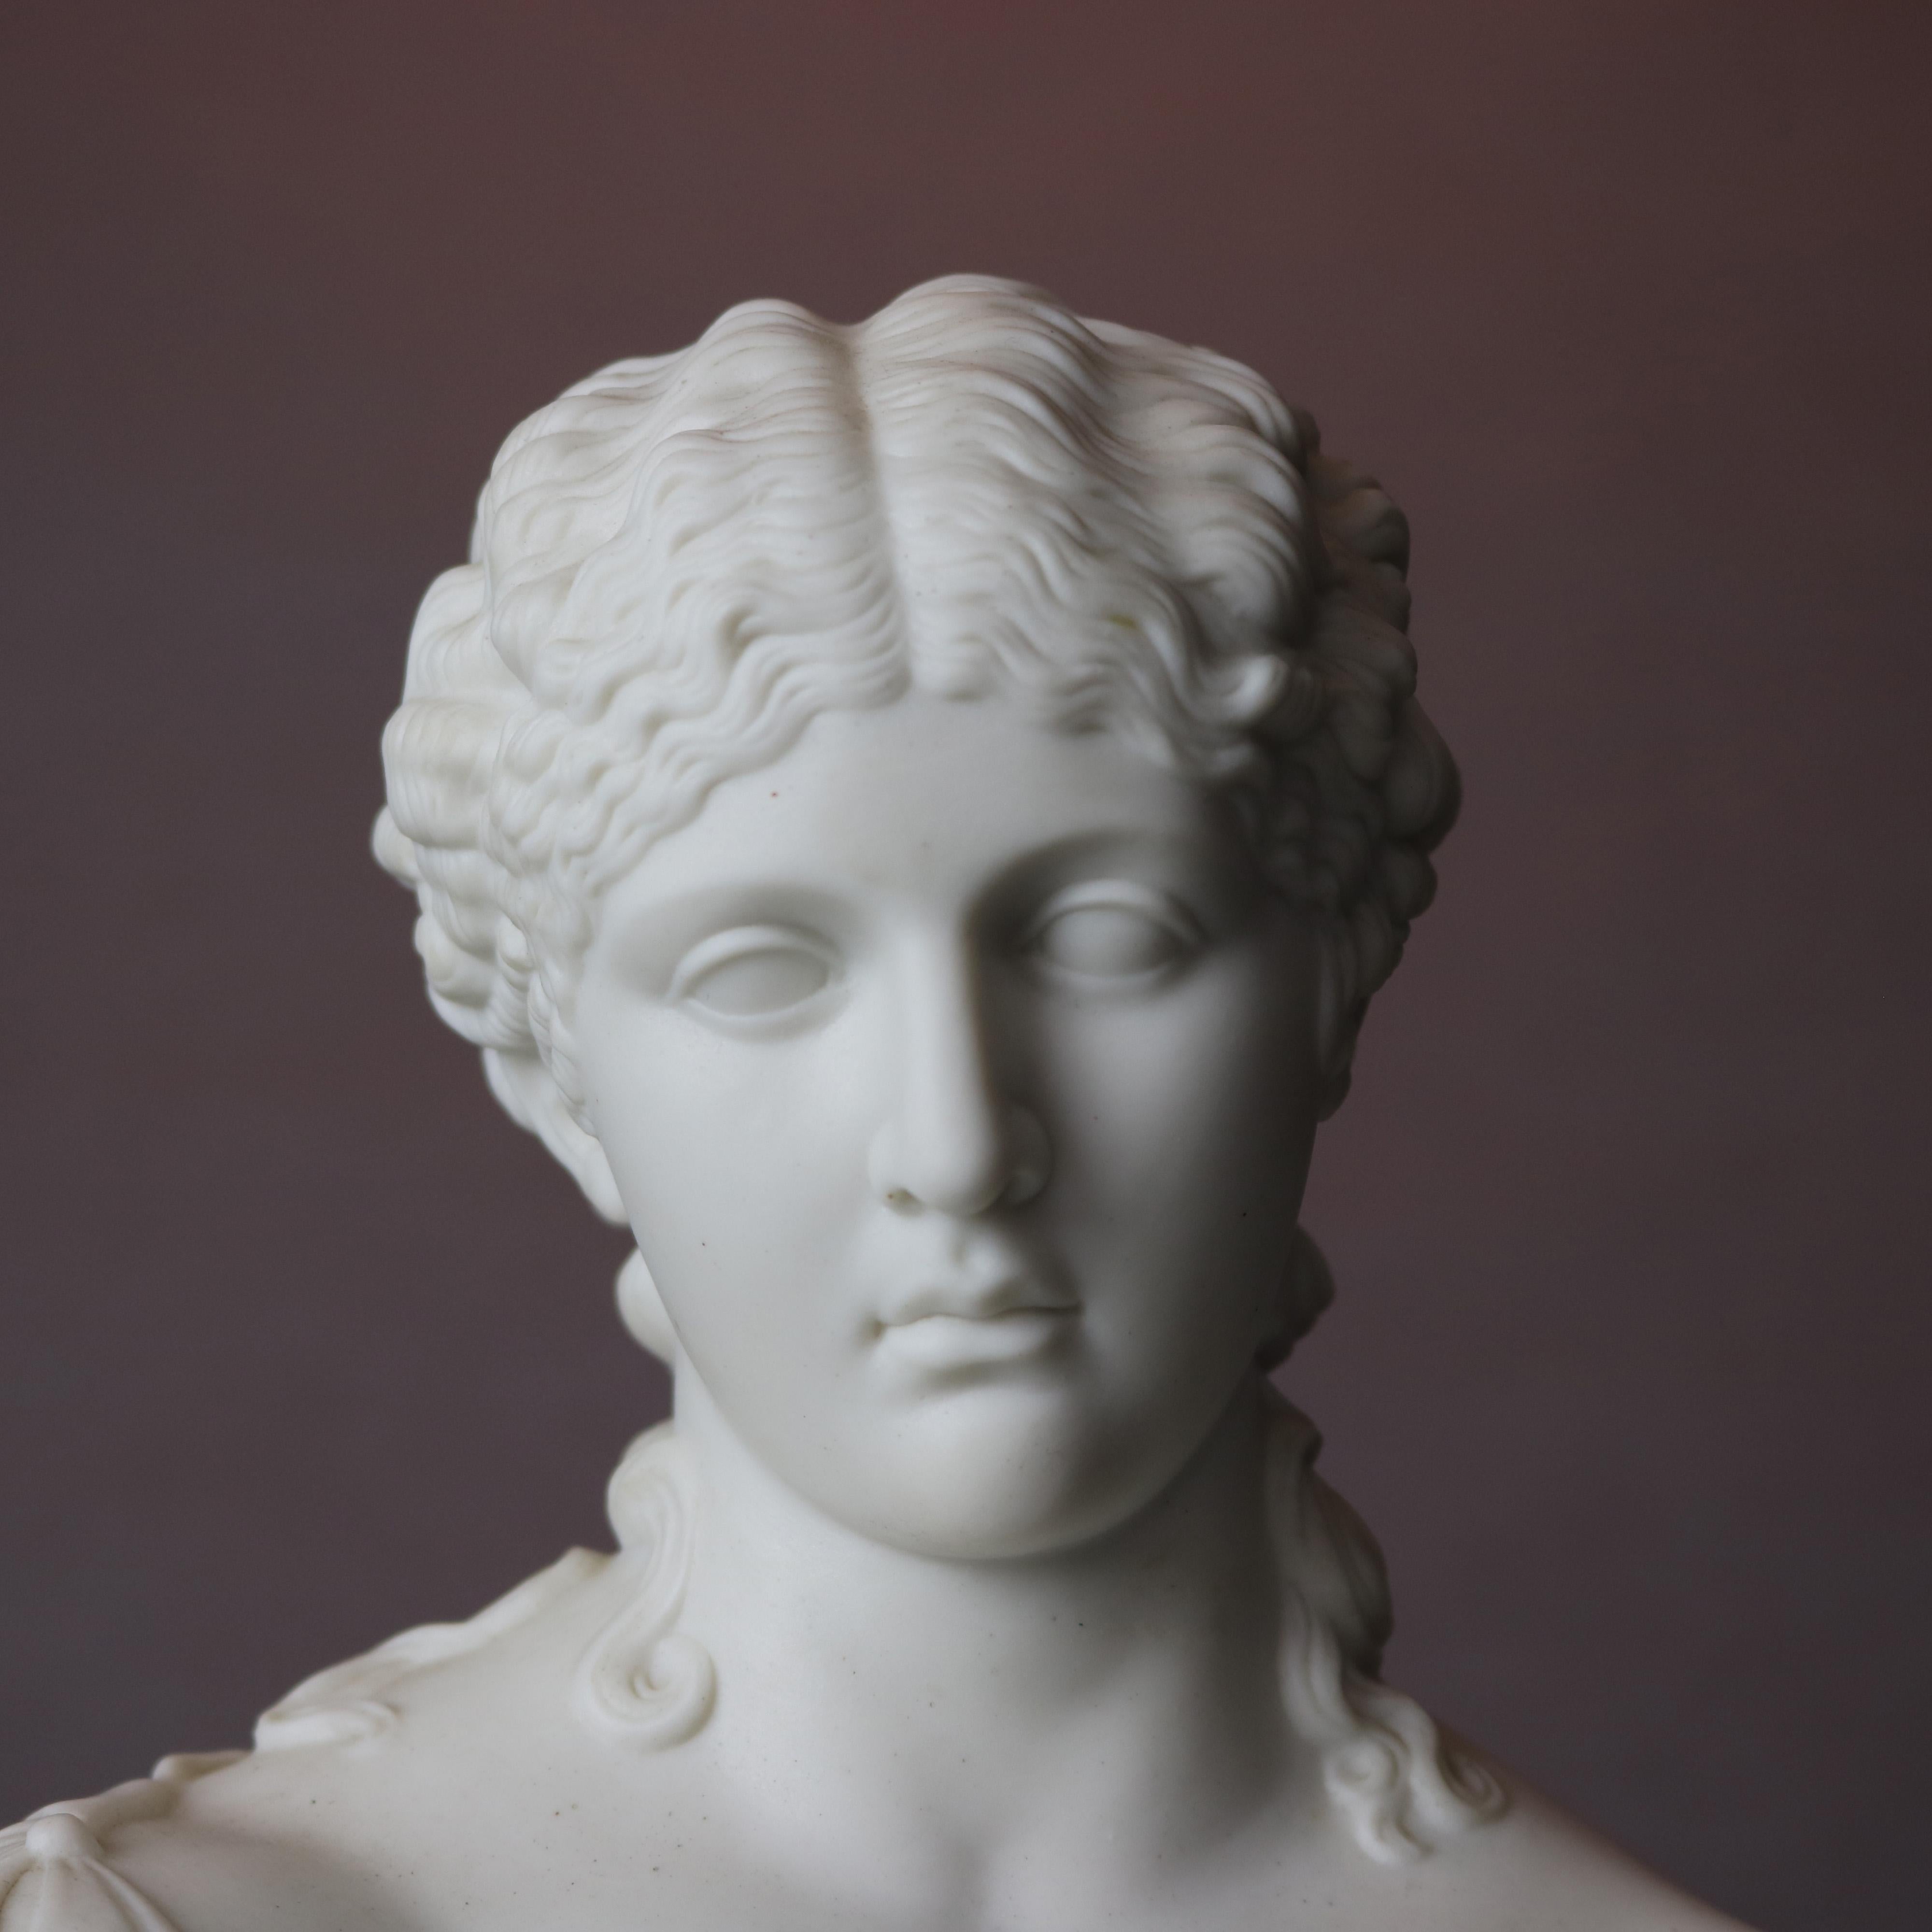 English Copeland School Parian portrait bust sculpture depicts classical woman framed by floral petals, reminiscent of a flower, raised on stepped plinth, circa 1890.

Measures: 12